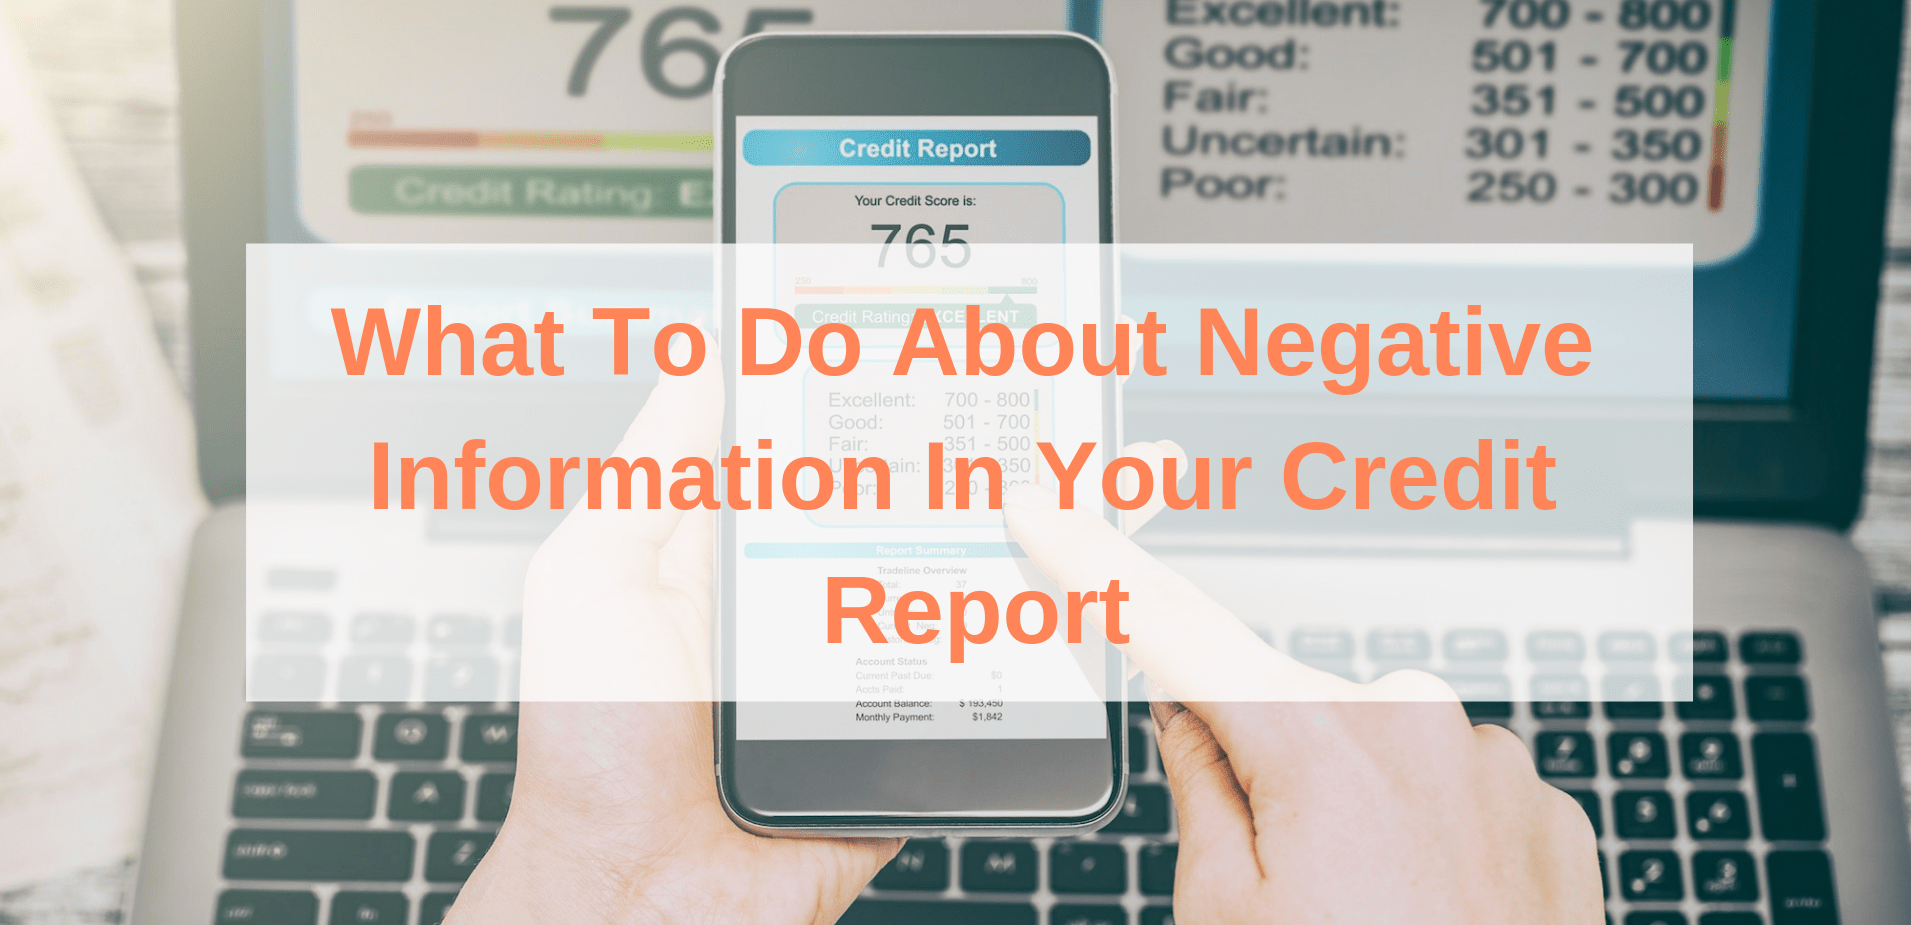 What To Do About Negative Information In Your Credit Report